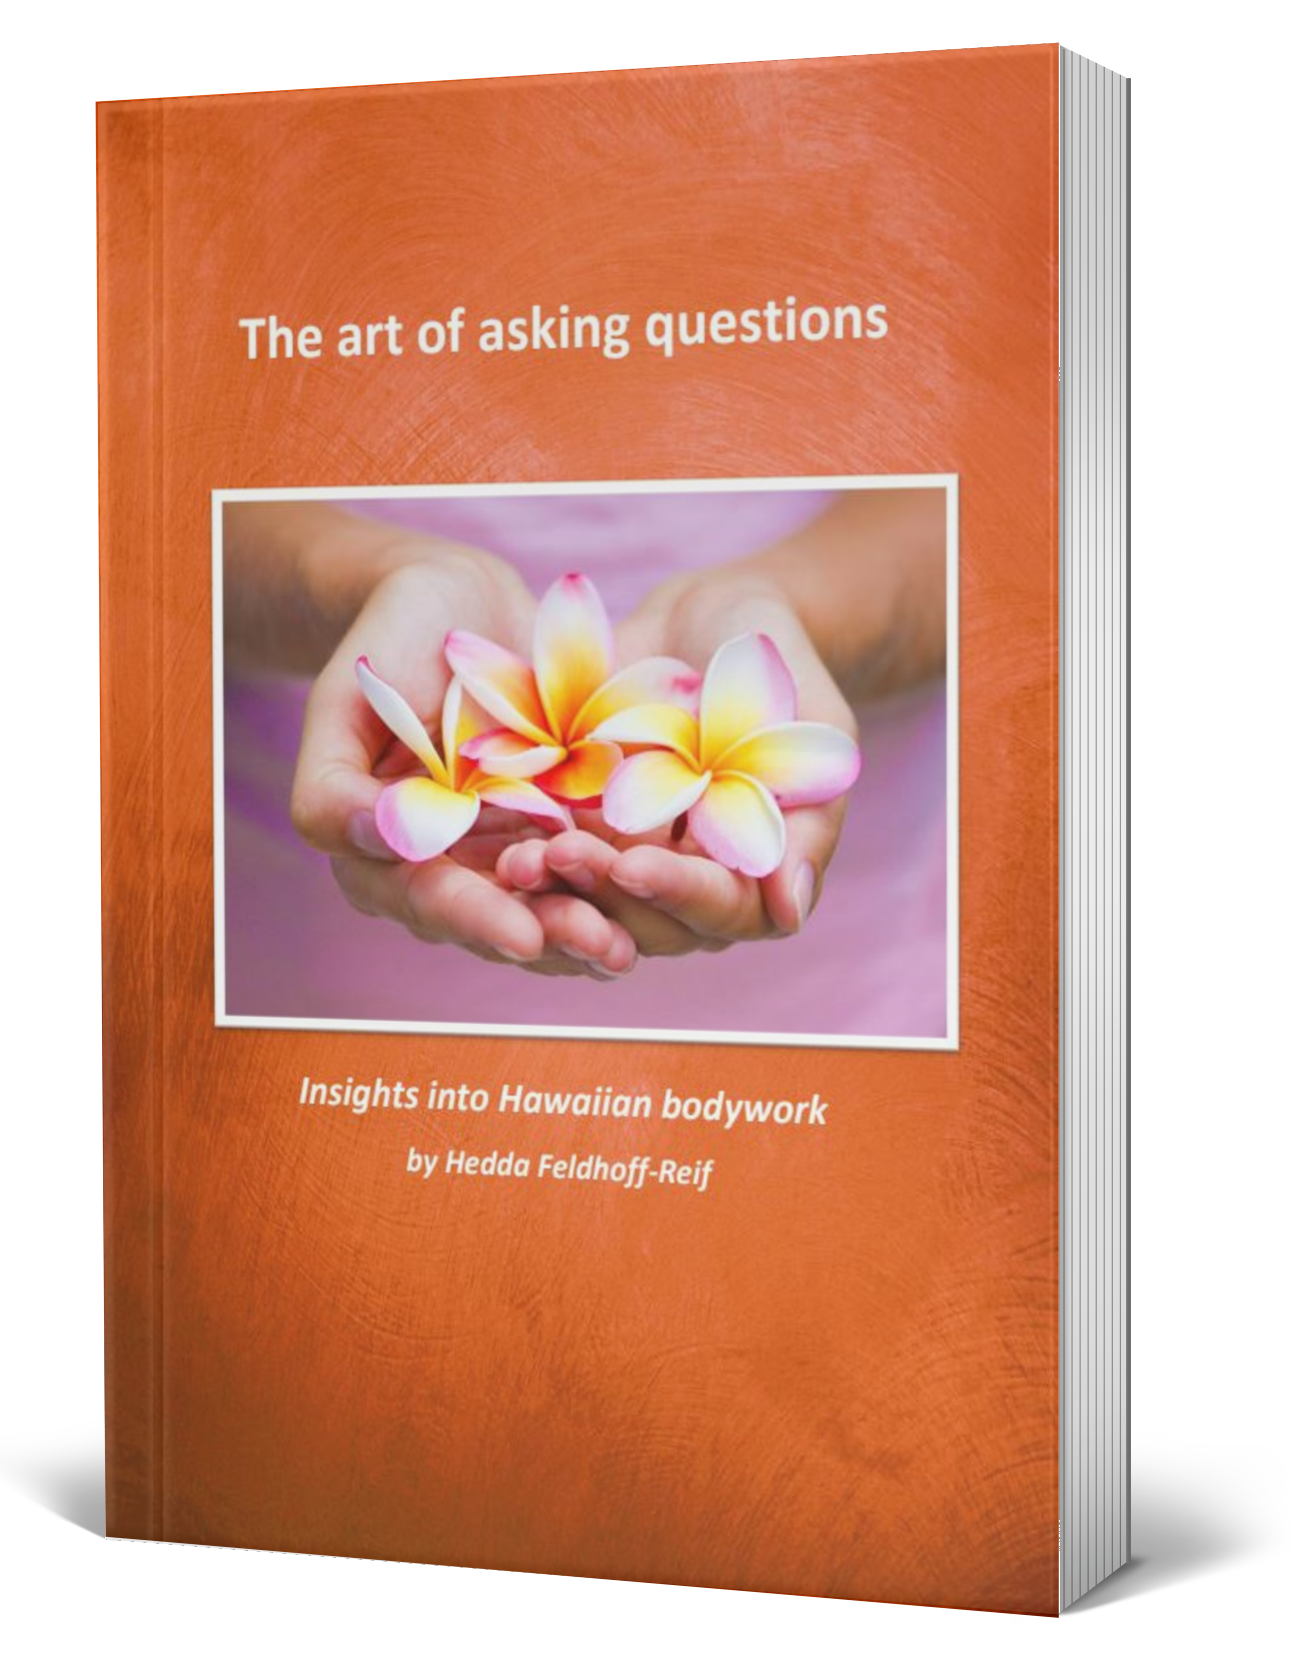 The art of asking questions